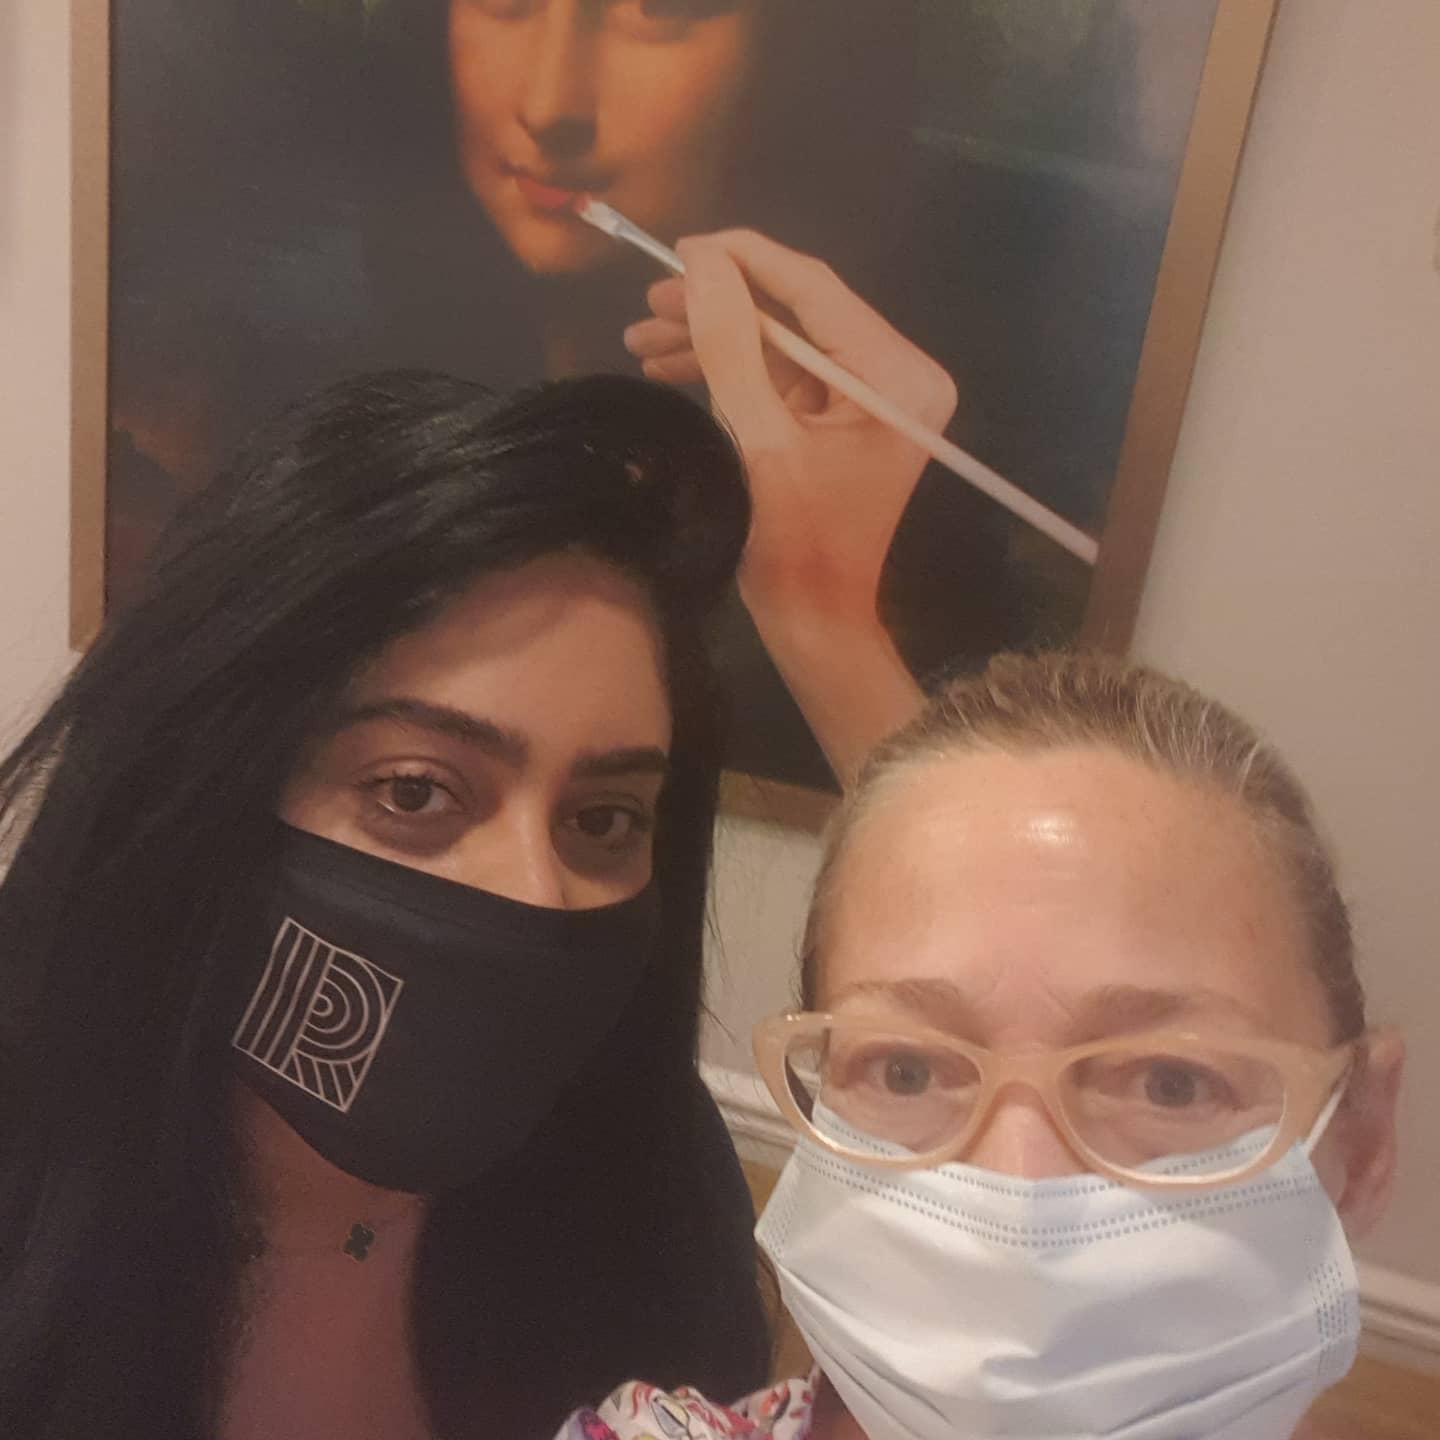 I ventured into London's West End yesterday for my first facial after 6 months. 
I had been recommended to try Dr Rasha's clinic in Mayfair.
.
I was temperature checked on arrival, the reception staff were behind screens and wearing masks, and masks were obligatory in the waiting areas and for therapists. 
.
The clinic was extremely professional, clean and somewhere any new anxious client would feel completely  confident and comfortable, in these post-lockdown Covid times,  to go to be treated. 
.
Here I am in pic 1, all masked up, with the lovely owner- Dr Rasha aesthetics physician and clinic director,  and in  pic 2 here I am after my facial with my 65-year old happy shiny face that loved the professional tlc and pampering it had just received. 
.
I will be revisiting again very soon. Thank you for my lovely afternoon. 
.
(Btw, this isnt an ad, I only write and post about places and products that I believe in and make a difference to my life and may inspire others). 
.
.
.
@drrashaclinic